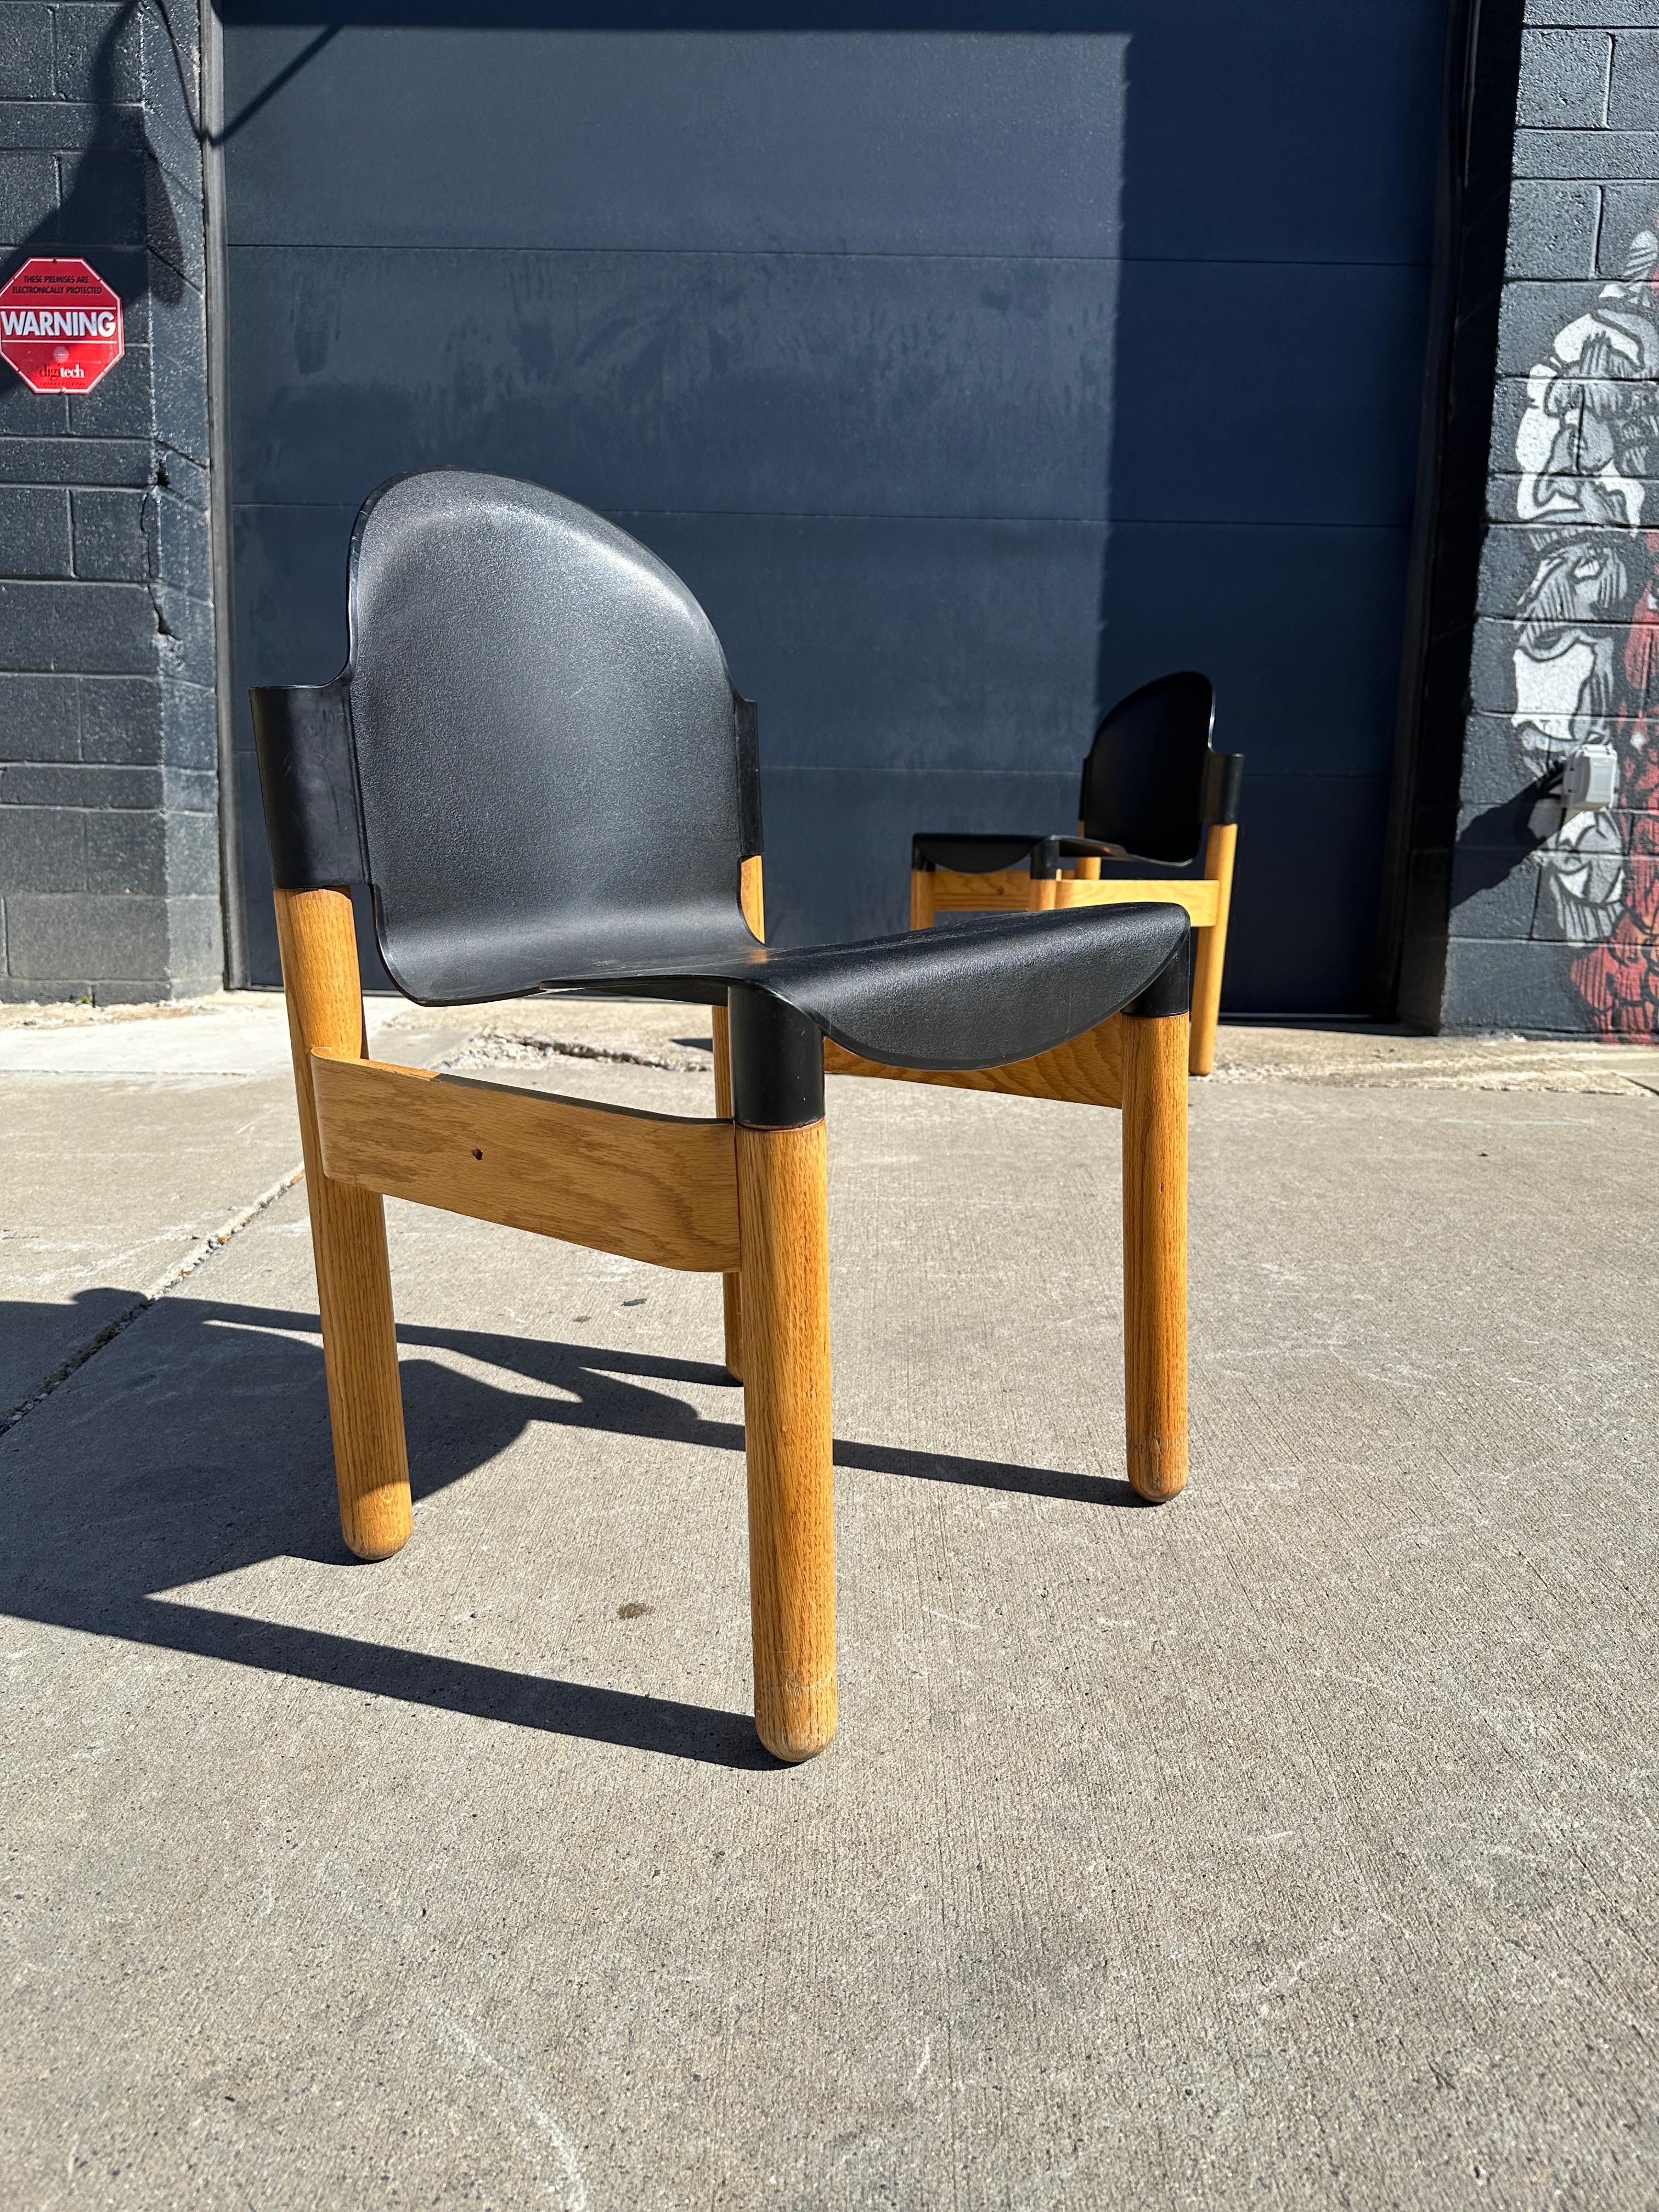 Pair of Midcentury Chair Flex Designed by Gerd Lange for Thonet In Good Condition For Sale In Asheville, NC